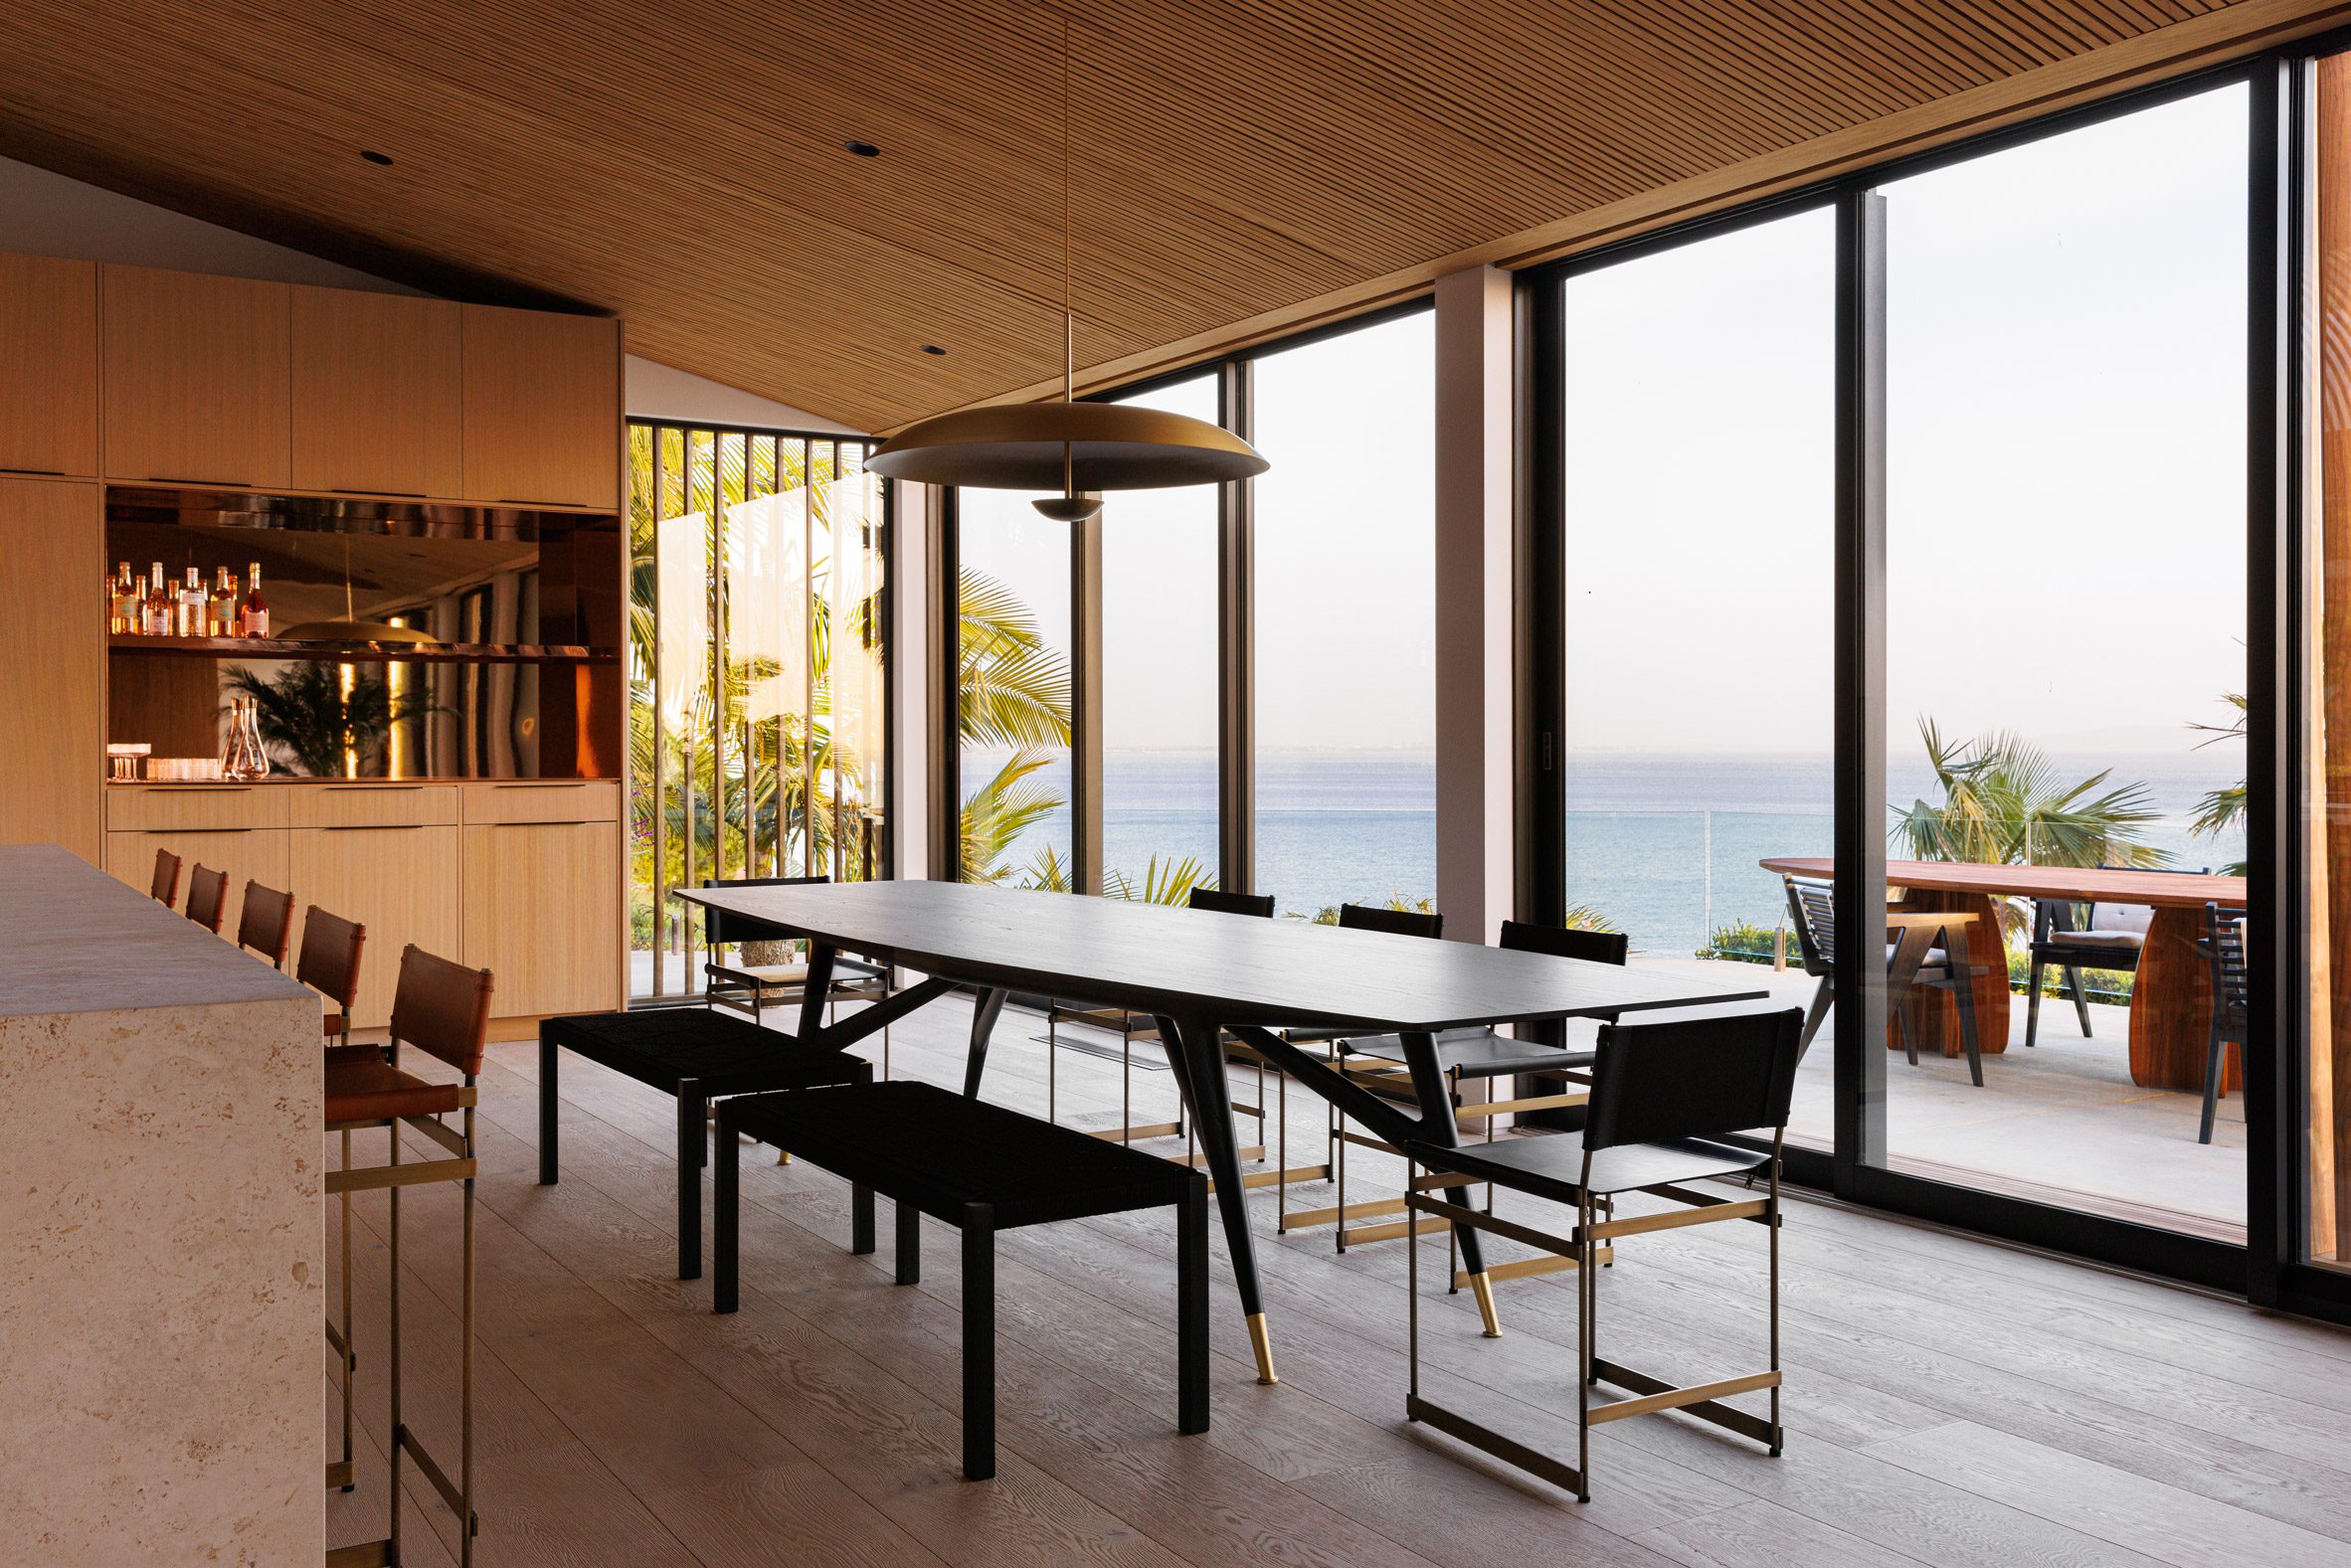 Dining room with a black Gio Ponti table overlooking the ocean